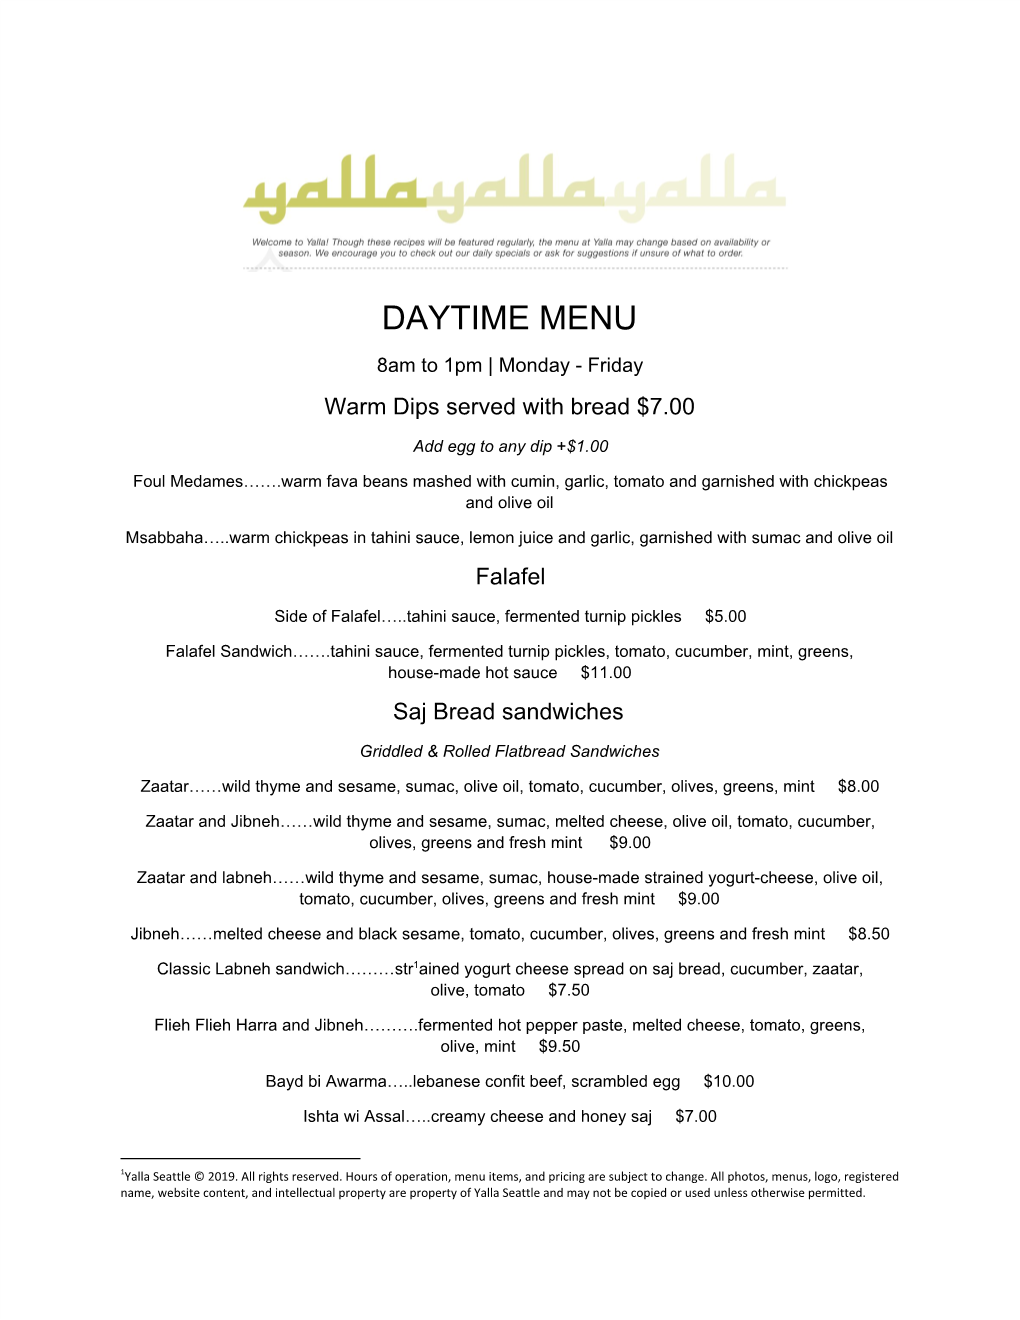 DAYTIME MENU 8Am to 1Pm | Monday - Friday Warm Dips Served with Bread $7.00